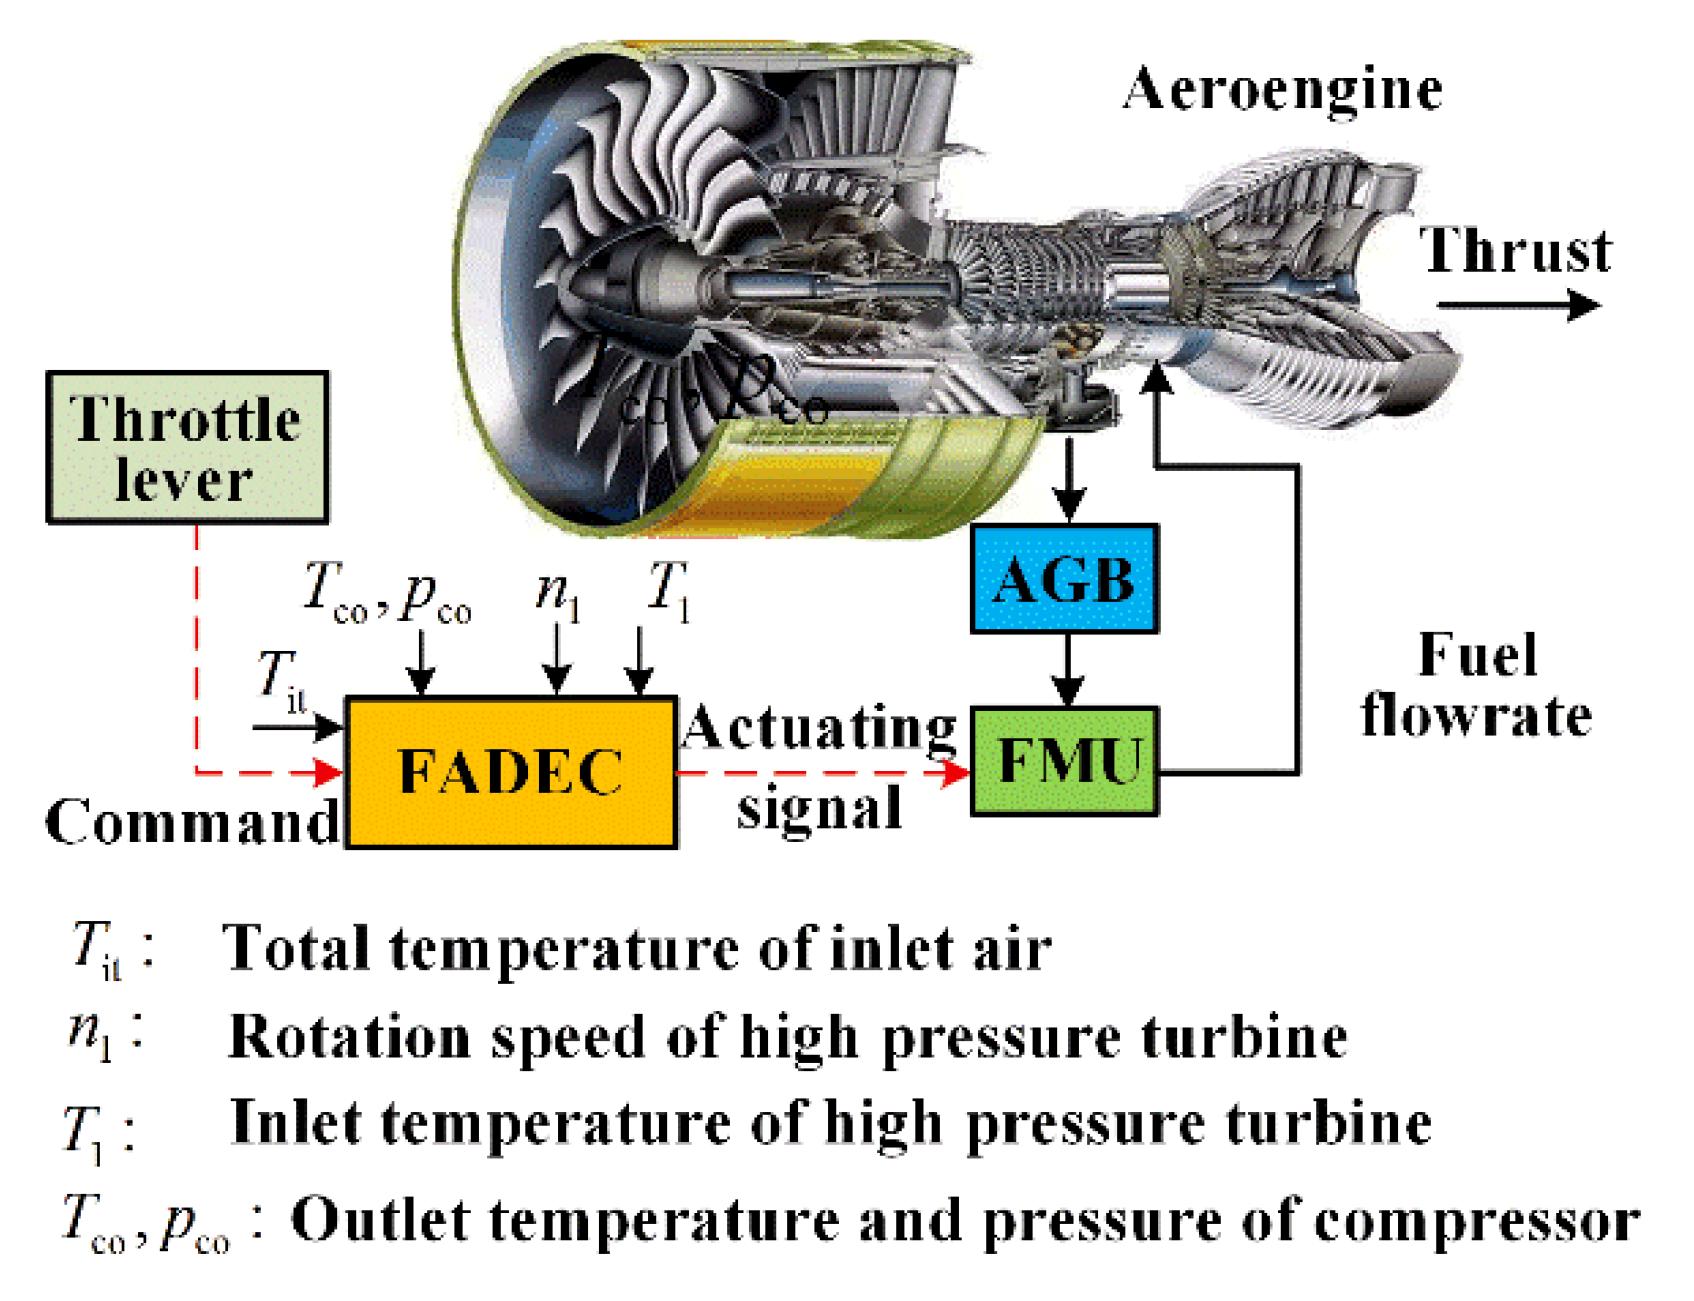 Most Powerful Rc Jet Engine: Future of RC Jet Engines: Trends, Challenges, and Potential Innovations